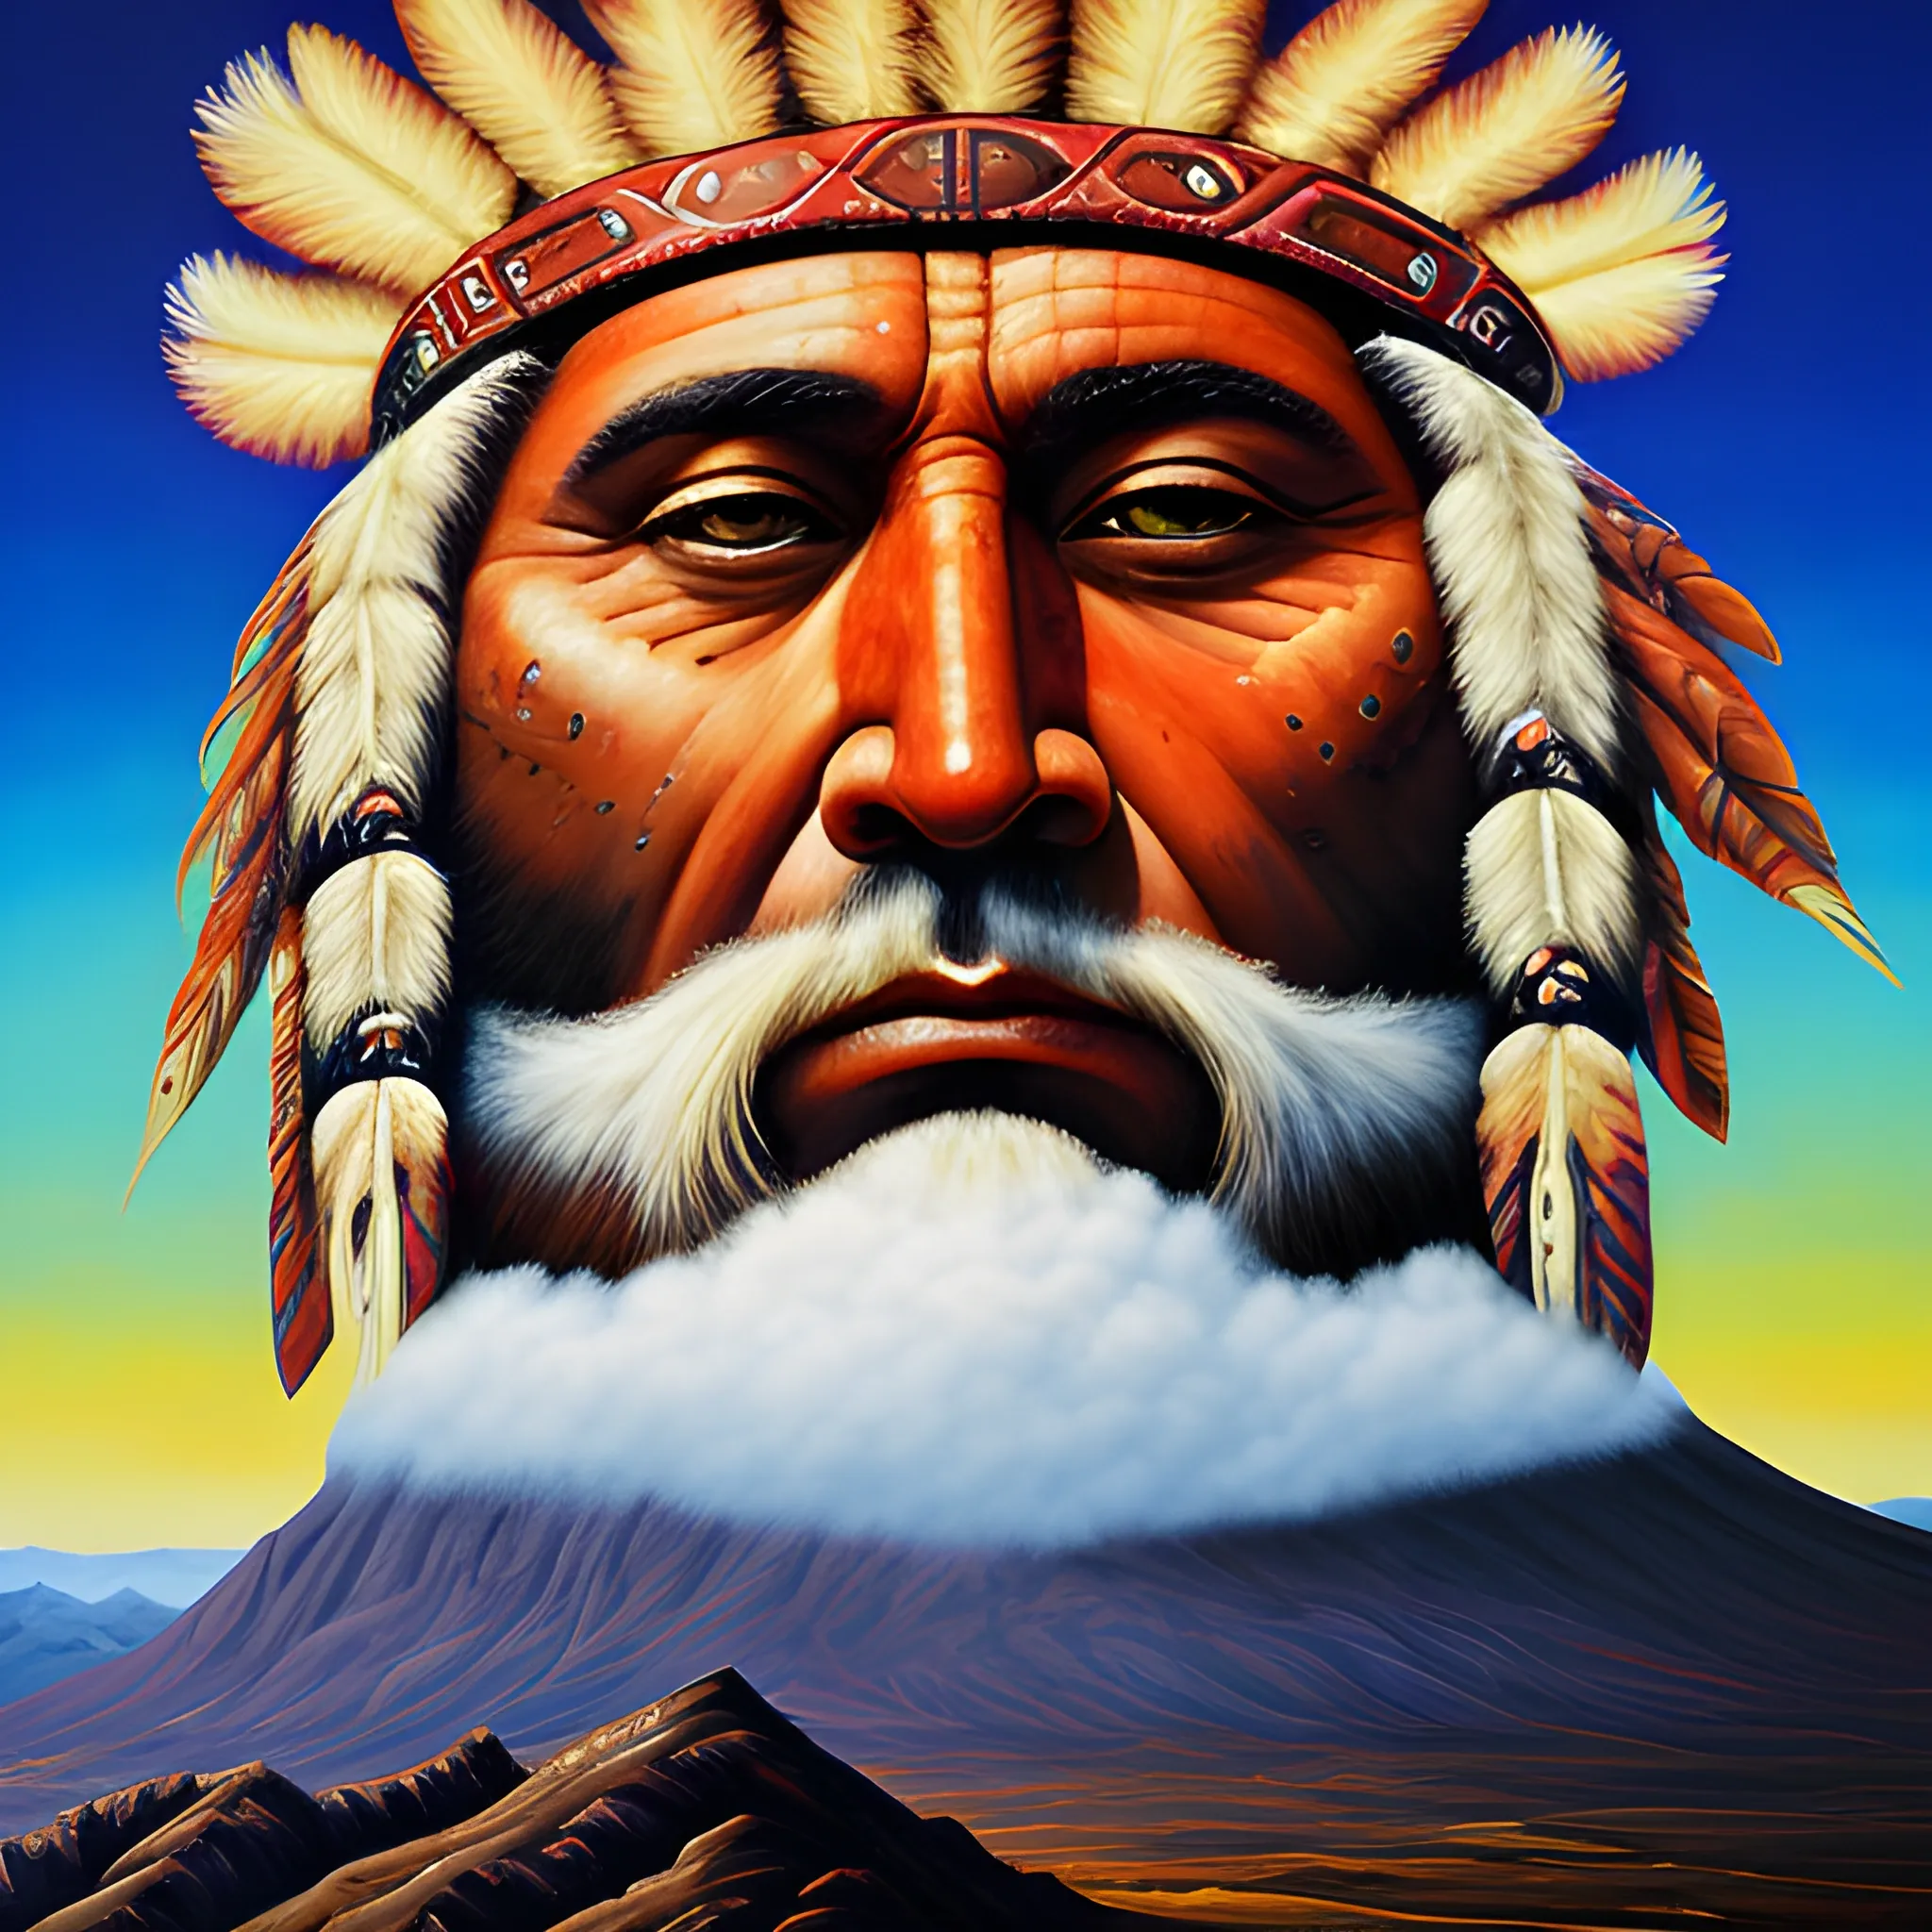 face of chief-
man. mountin landscape,
athmospher, clouds, Trippy, , Oil Painting